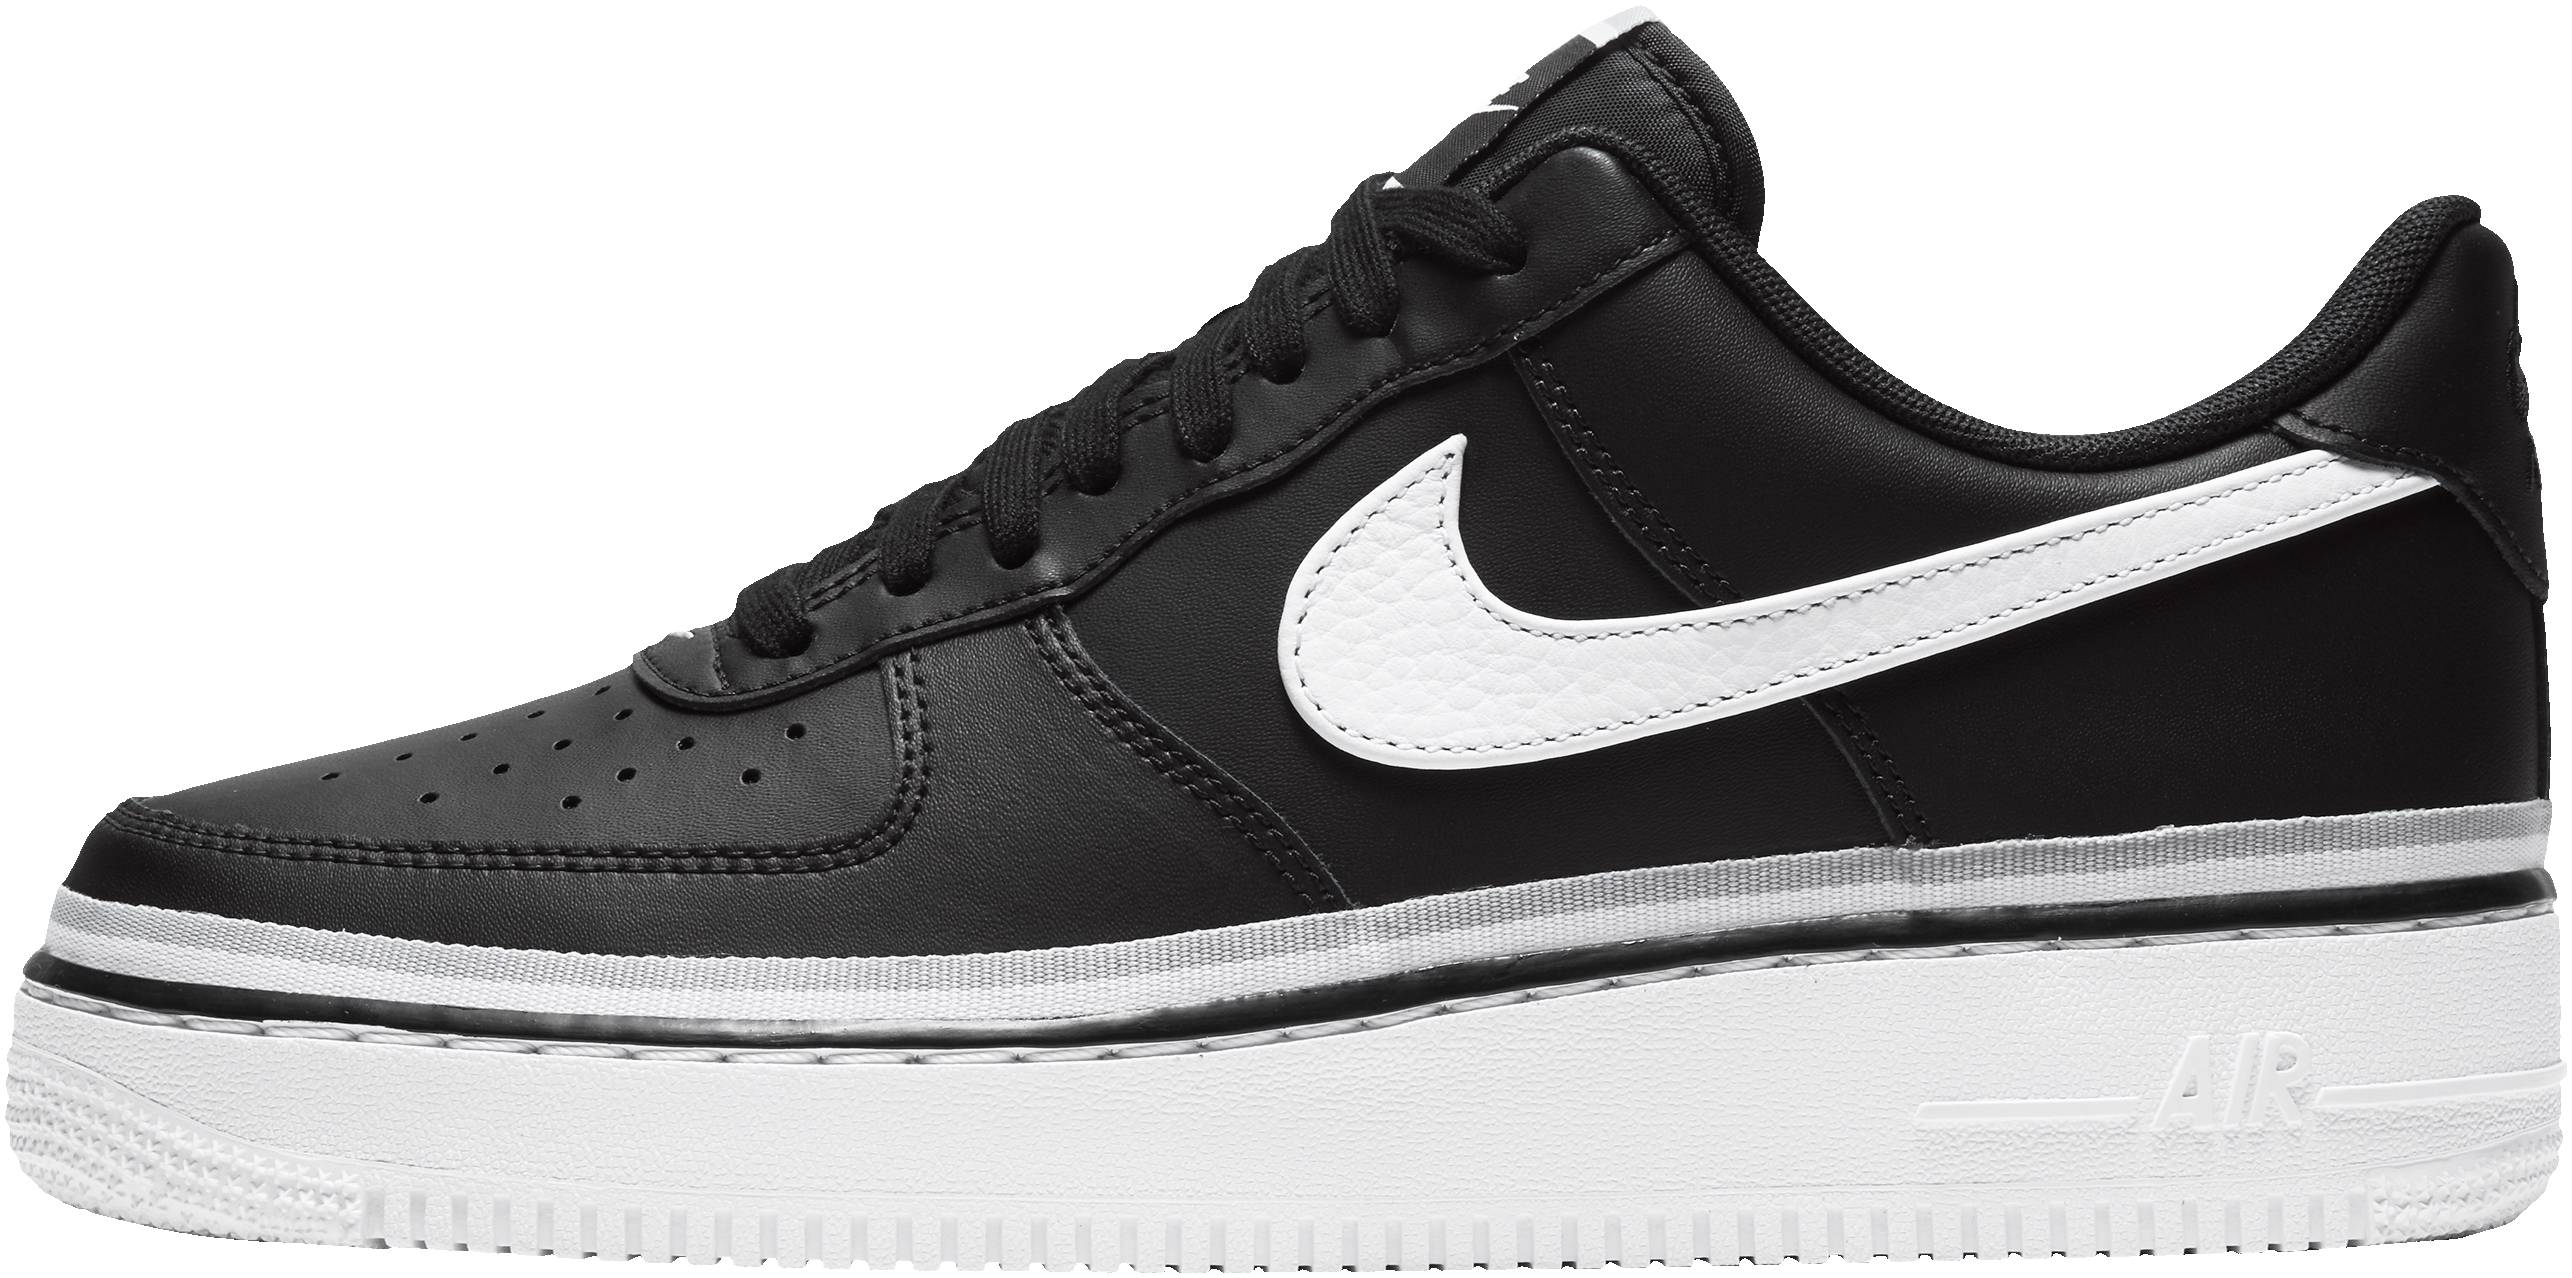 air force 1 sizes